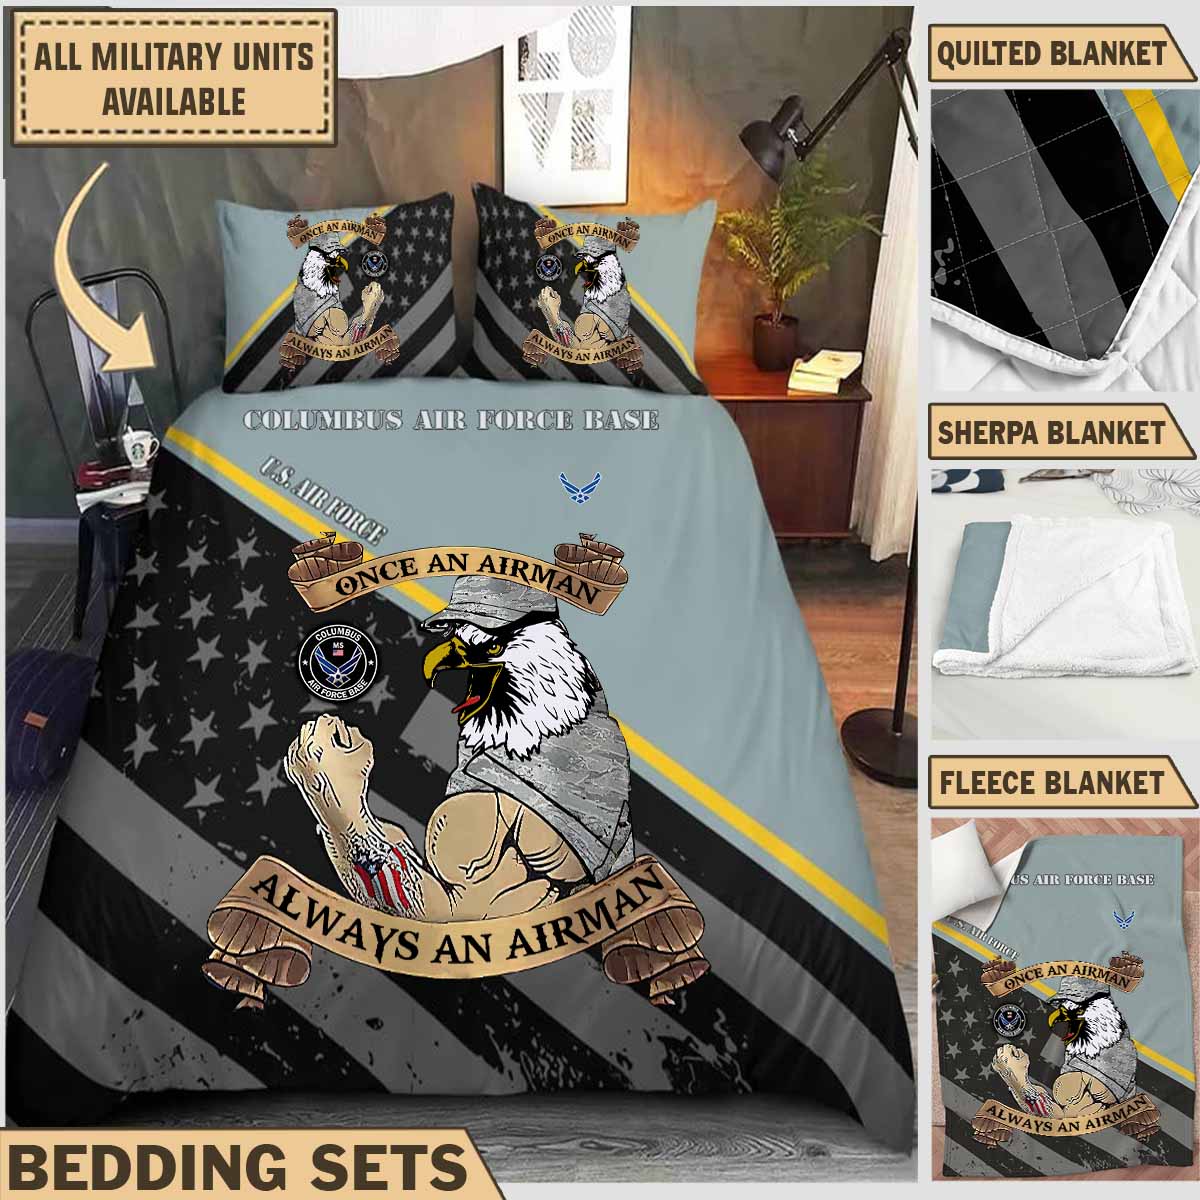 Columbus AFB Air Force Base_Bedding Collection